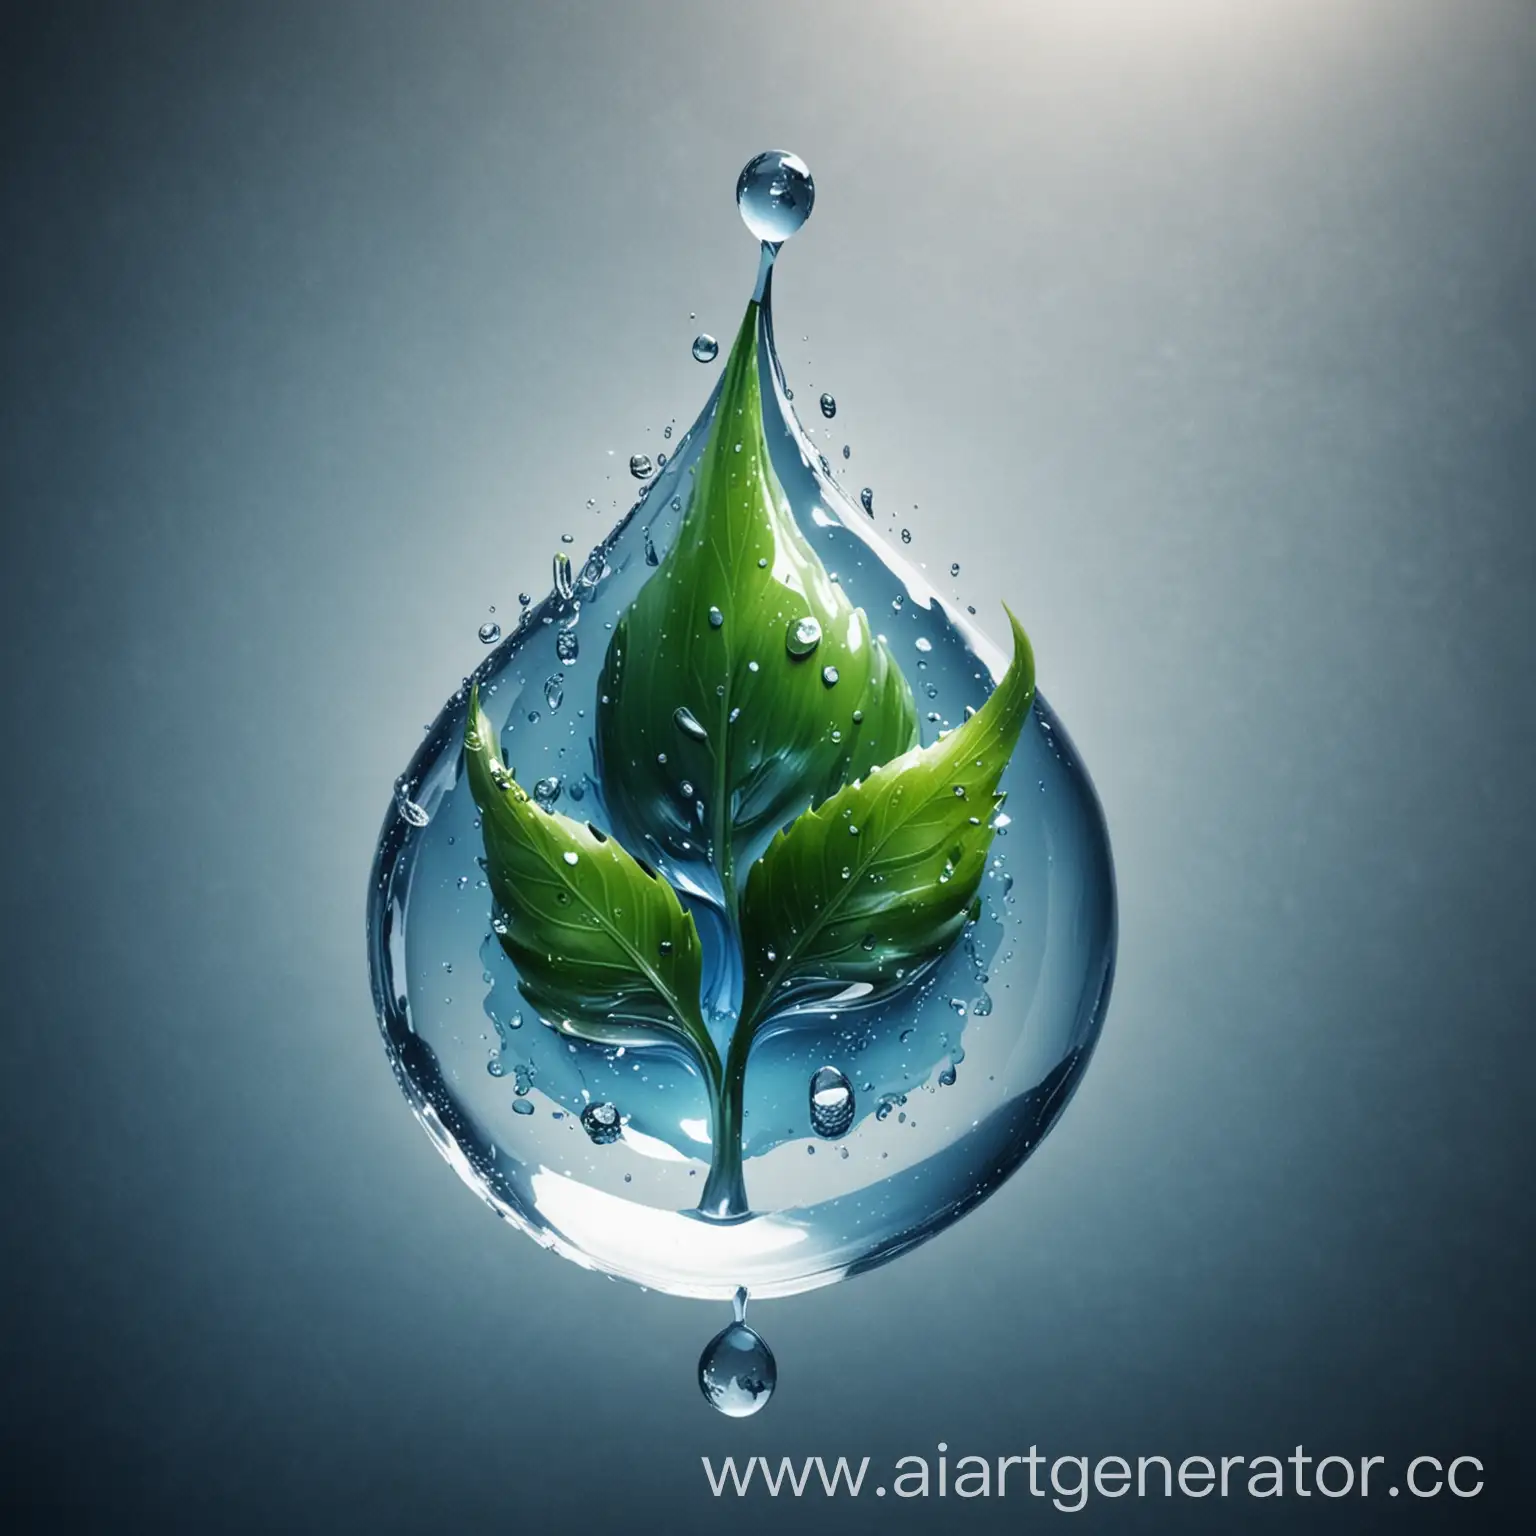 The image shows the logo, which is a drop of water surrounded by two green leaves. A drop of water is located in the center and has a blue color with a white glare, creating a volume effect. The leaves frame the drop on both sides and point upwards, creating a shape resembling a flame